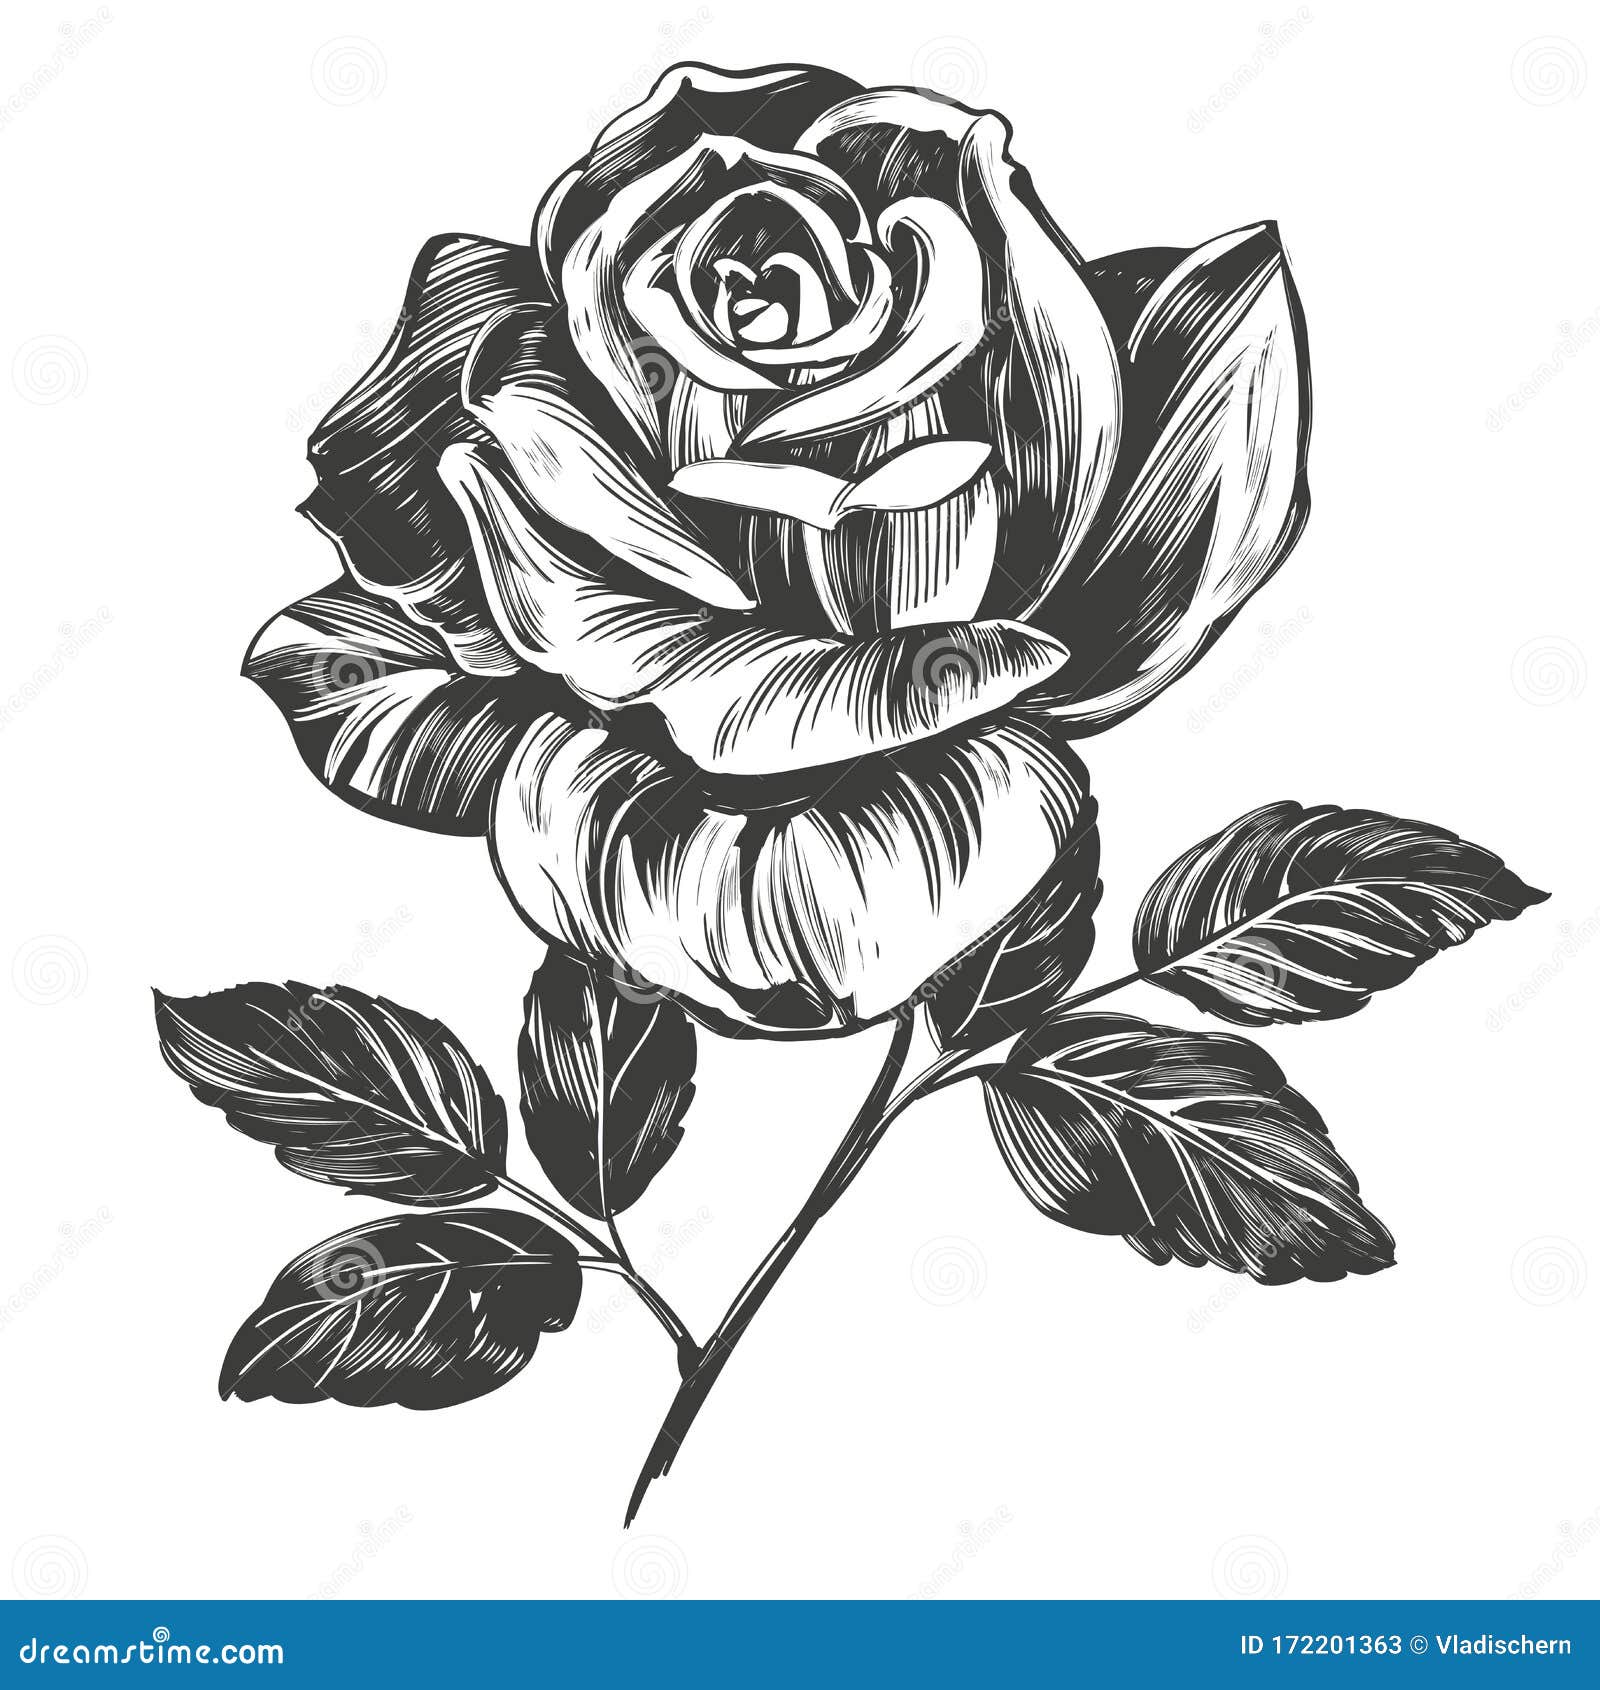 How to draw a Rose tattoo design step by step | Pencil Sketch - YouTube